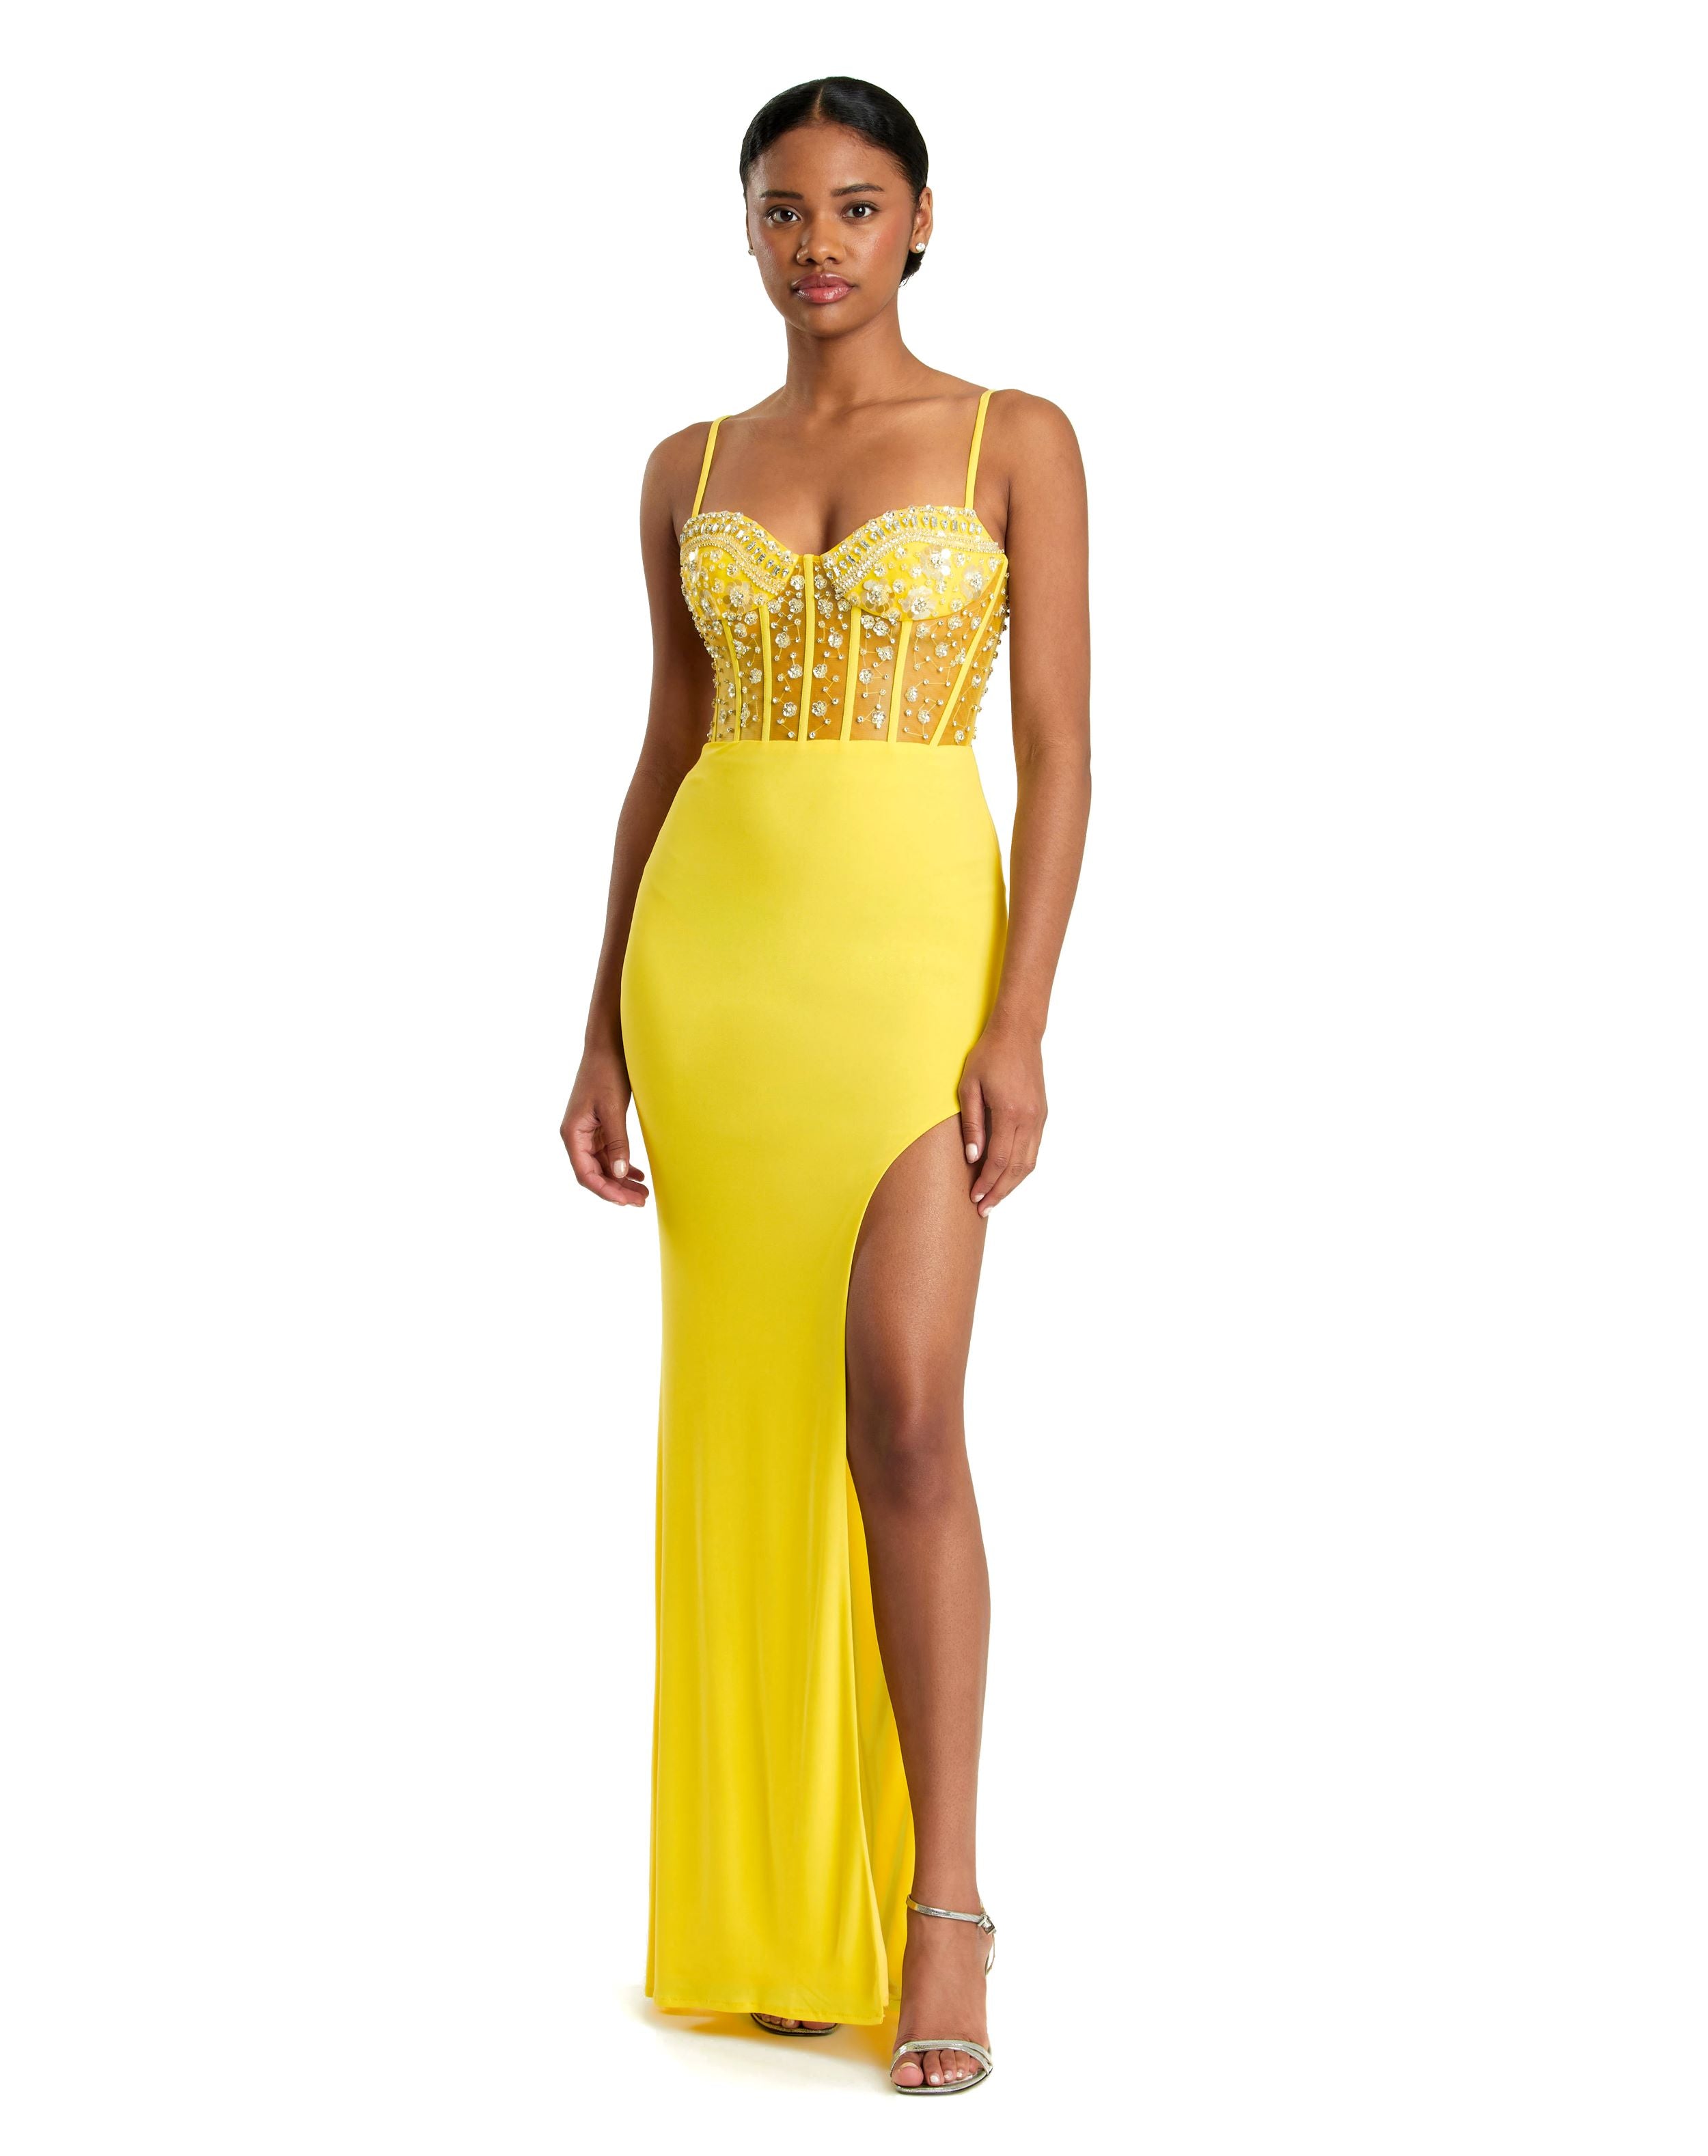 Spaghetti Strap Beaded Sheer Bodice Gown with Slit - FINAL SALE